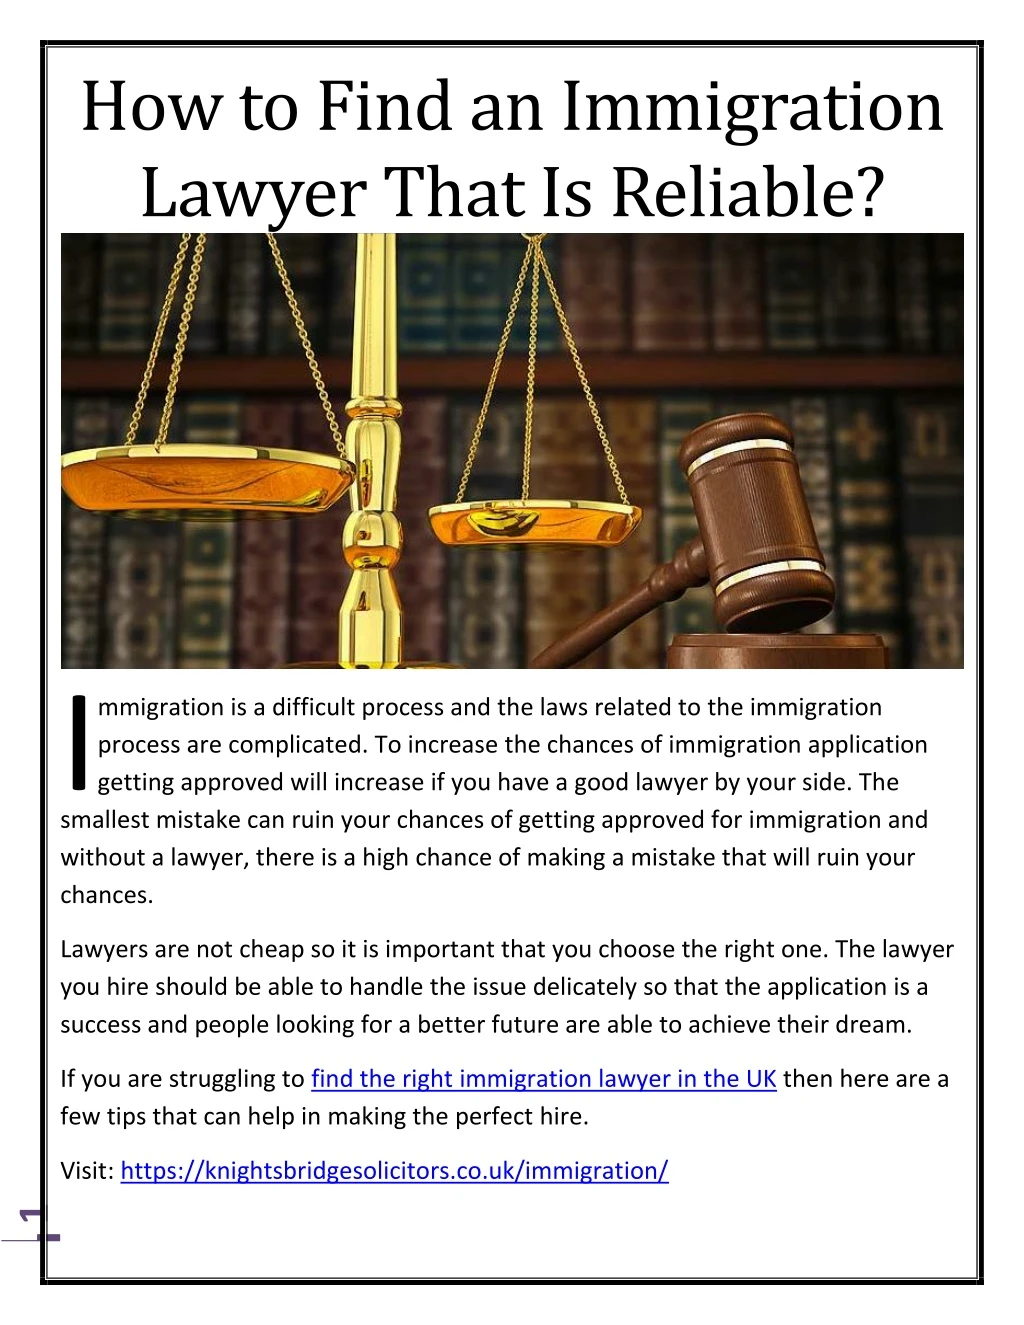 how to find an immigration lawyer that is reliable